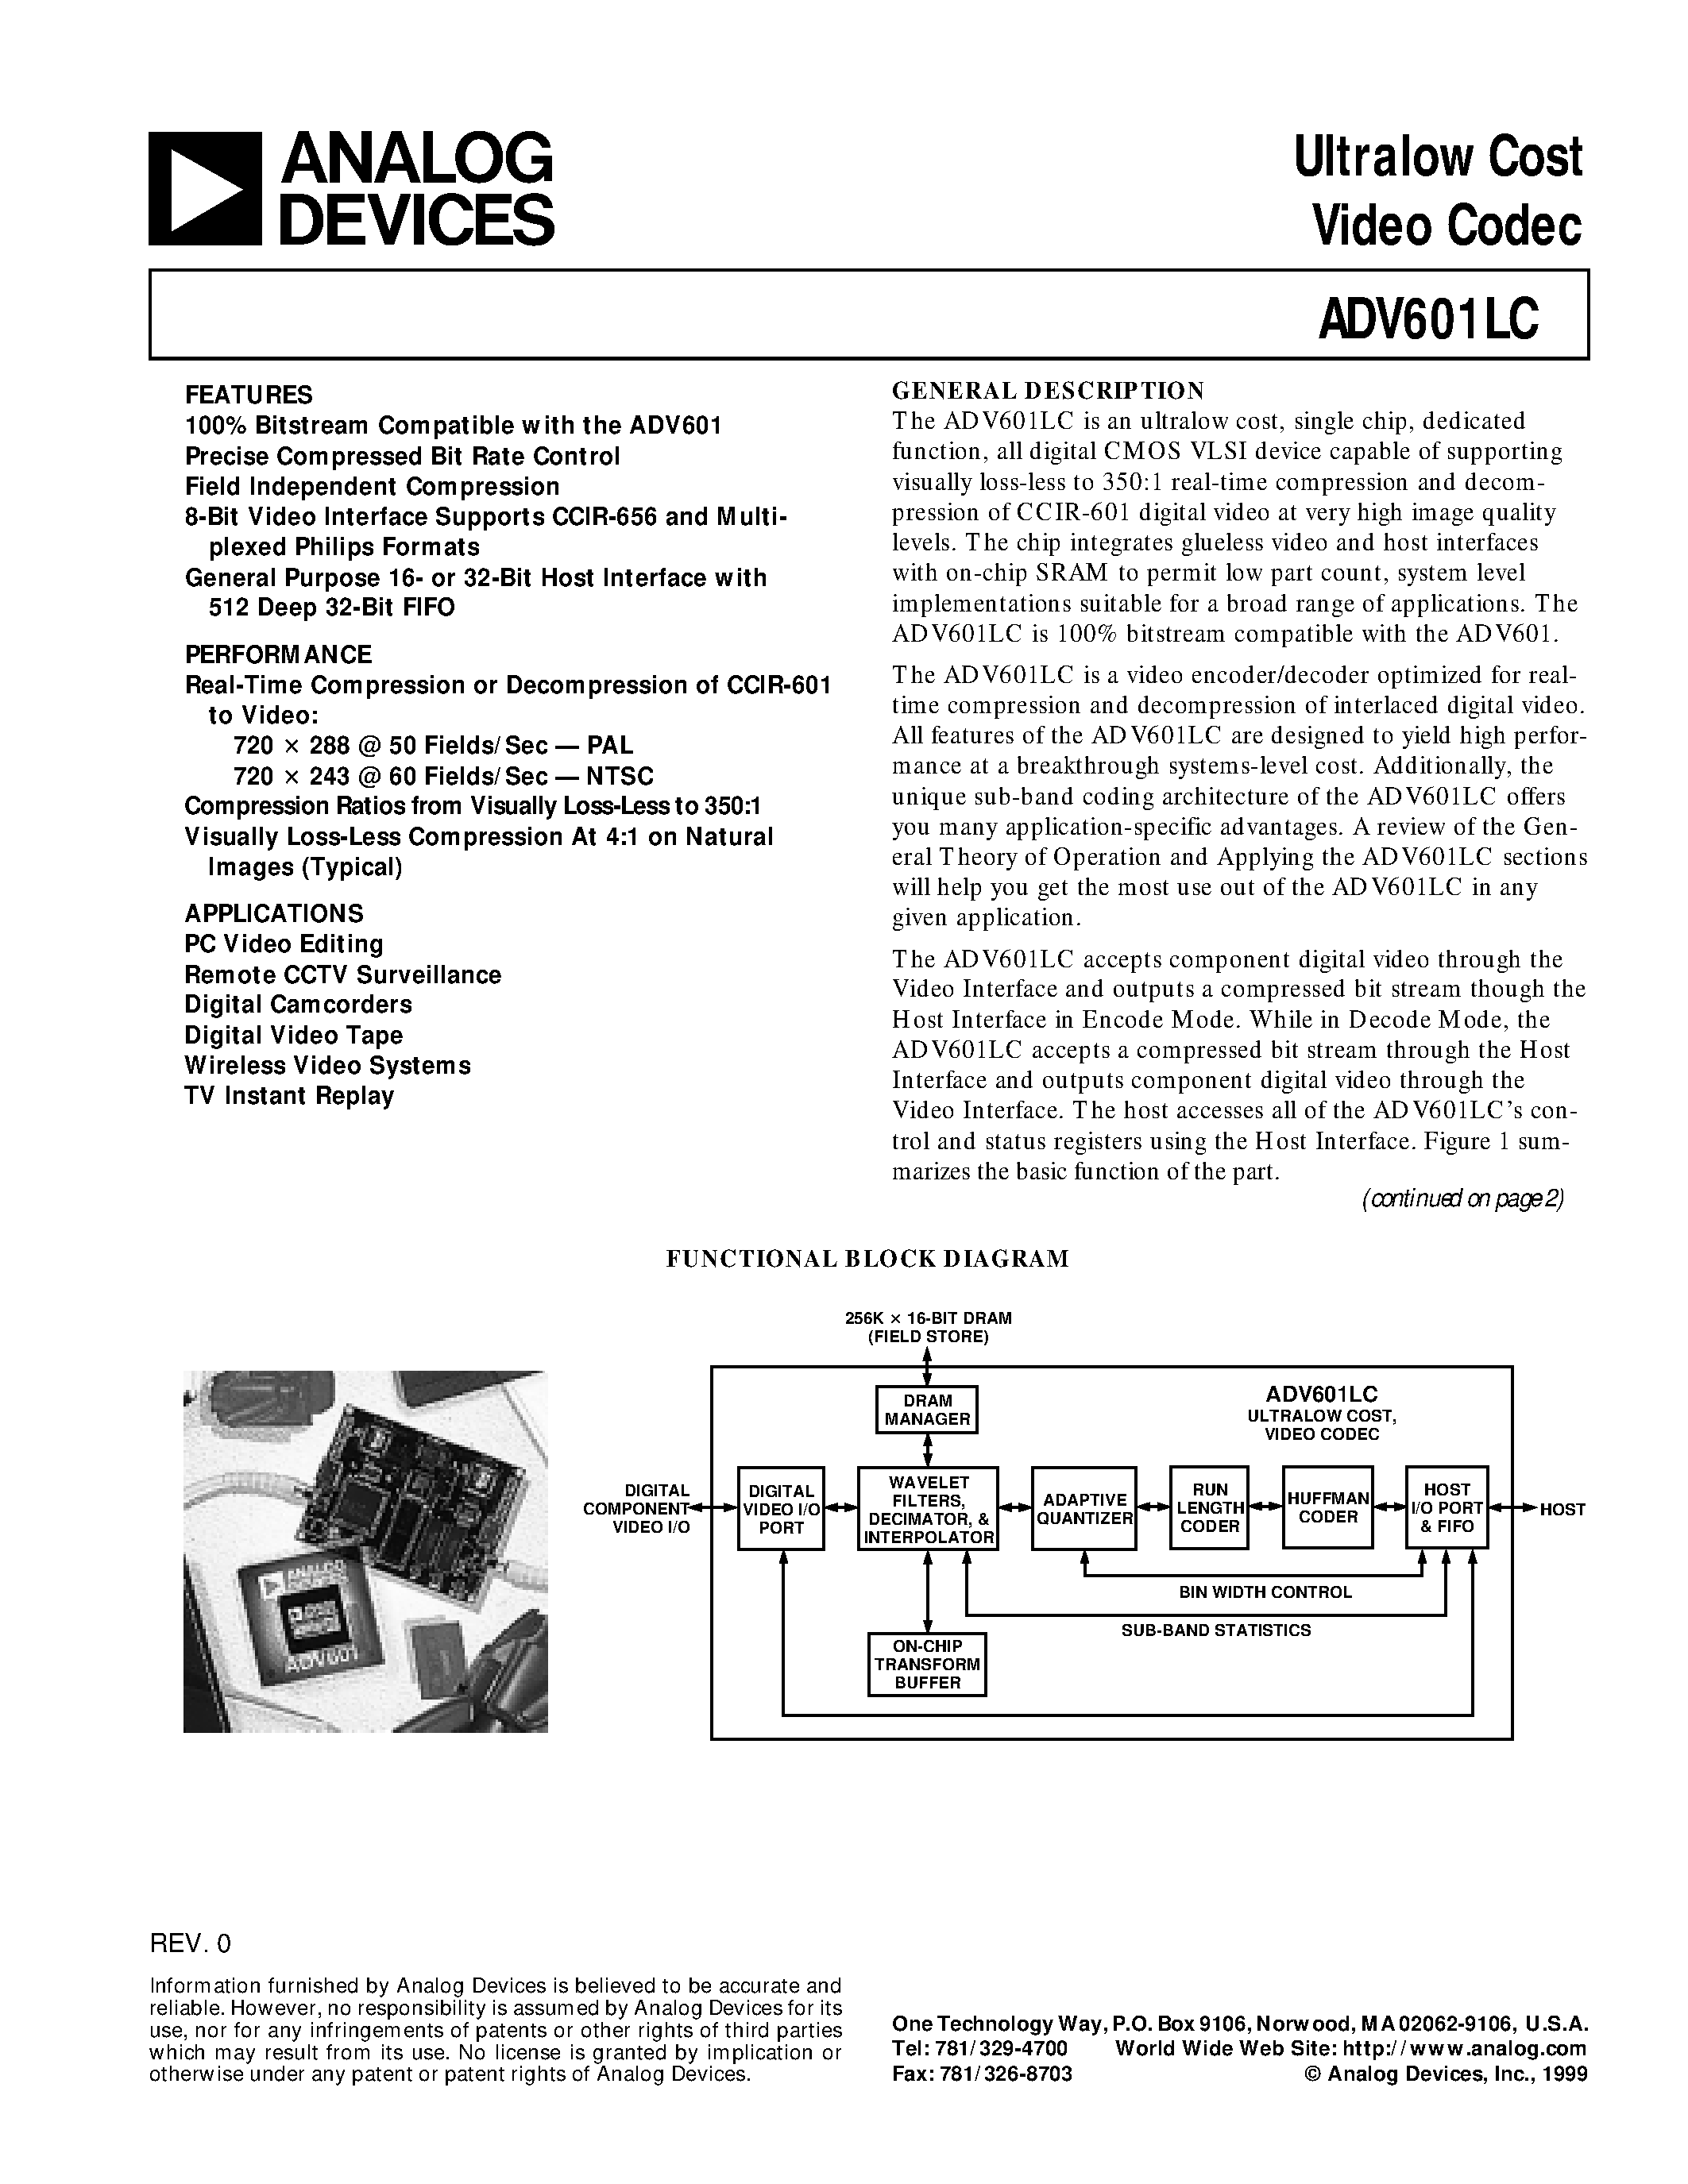 Datasheet ADV601LC - Ultralow Cost Video Codec page 1